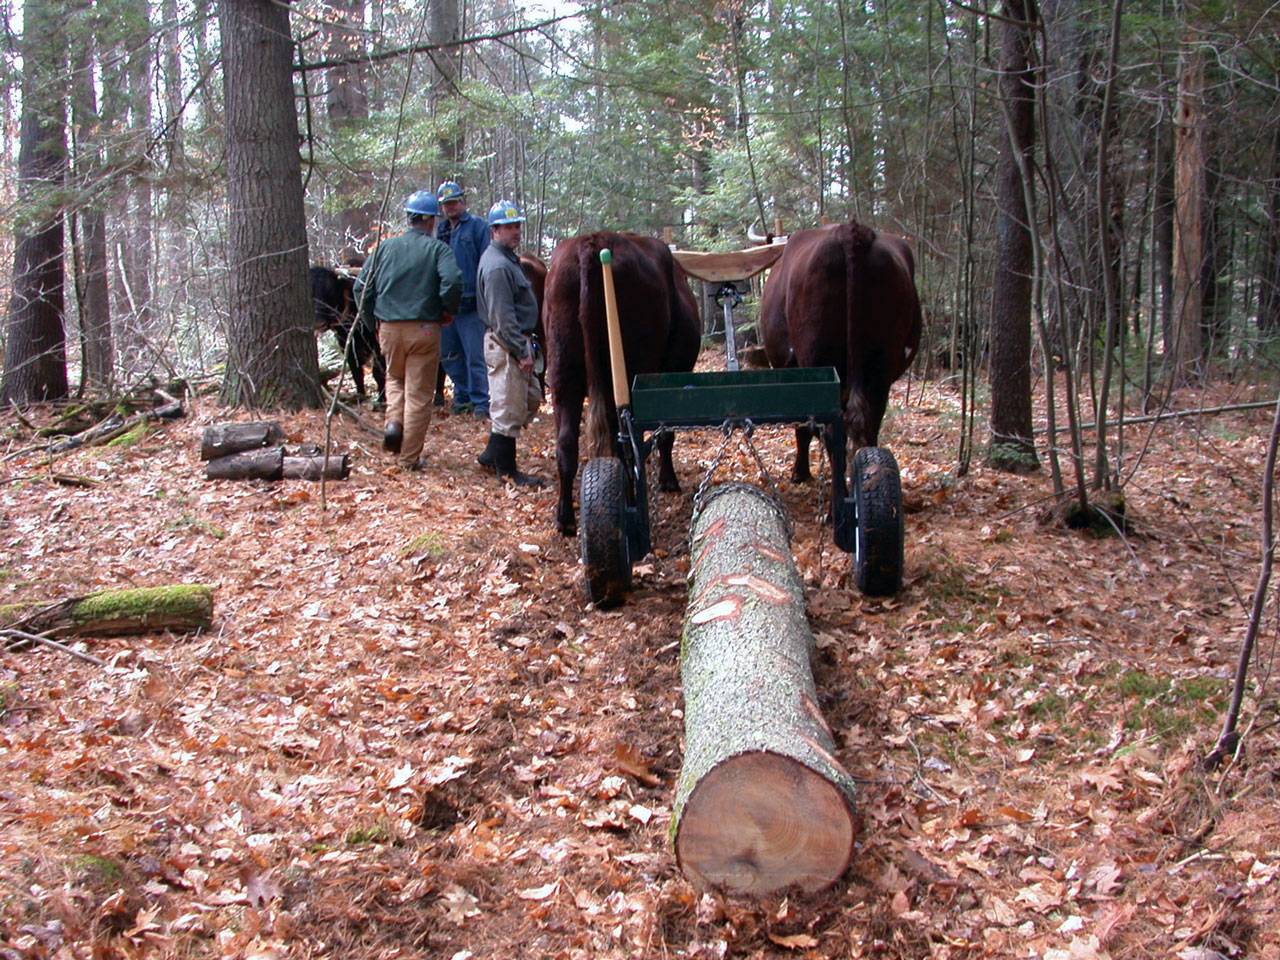 Logging with Oxen in New Hampshire